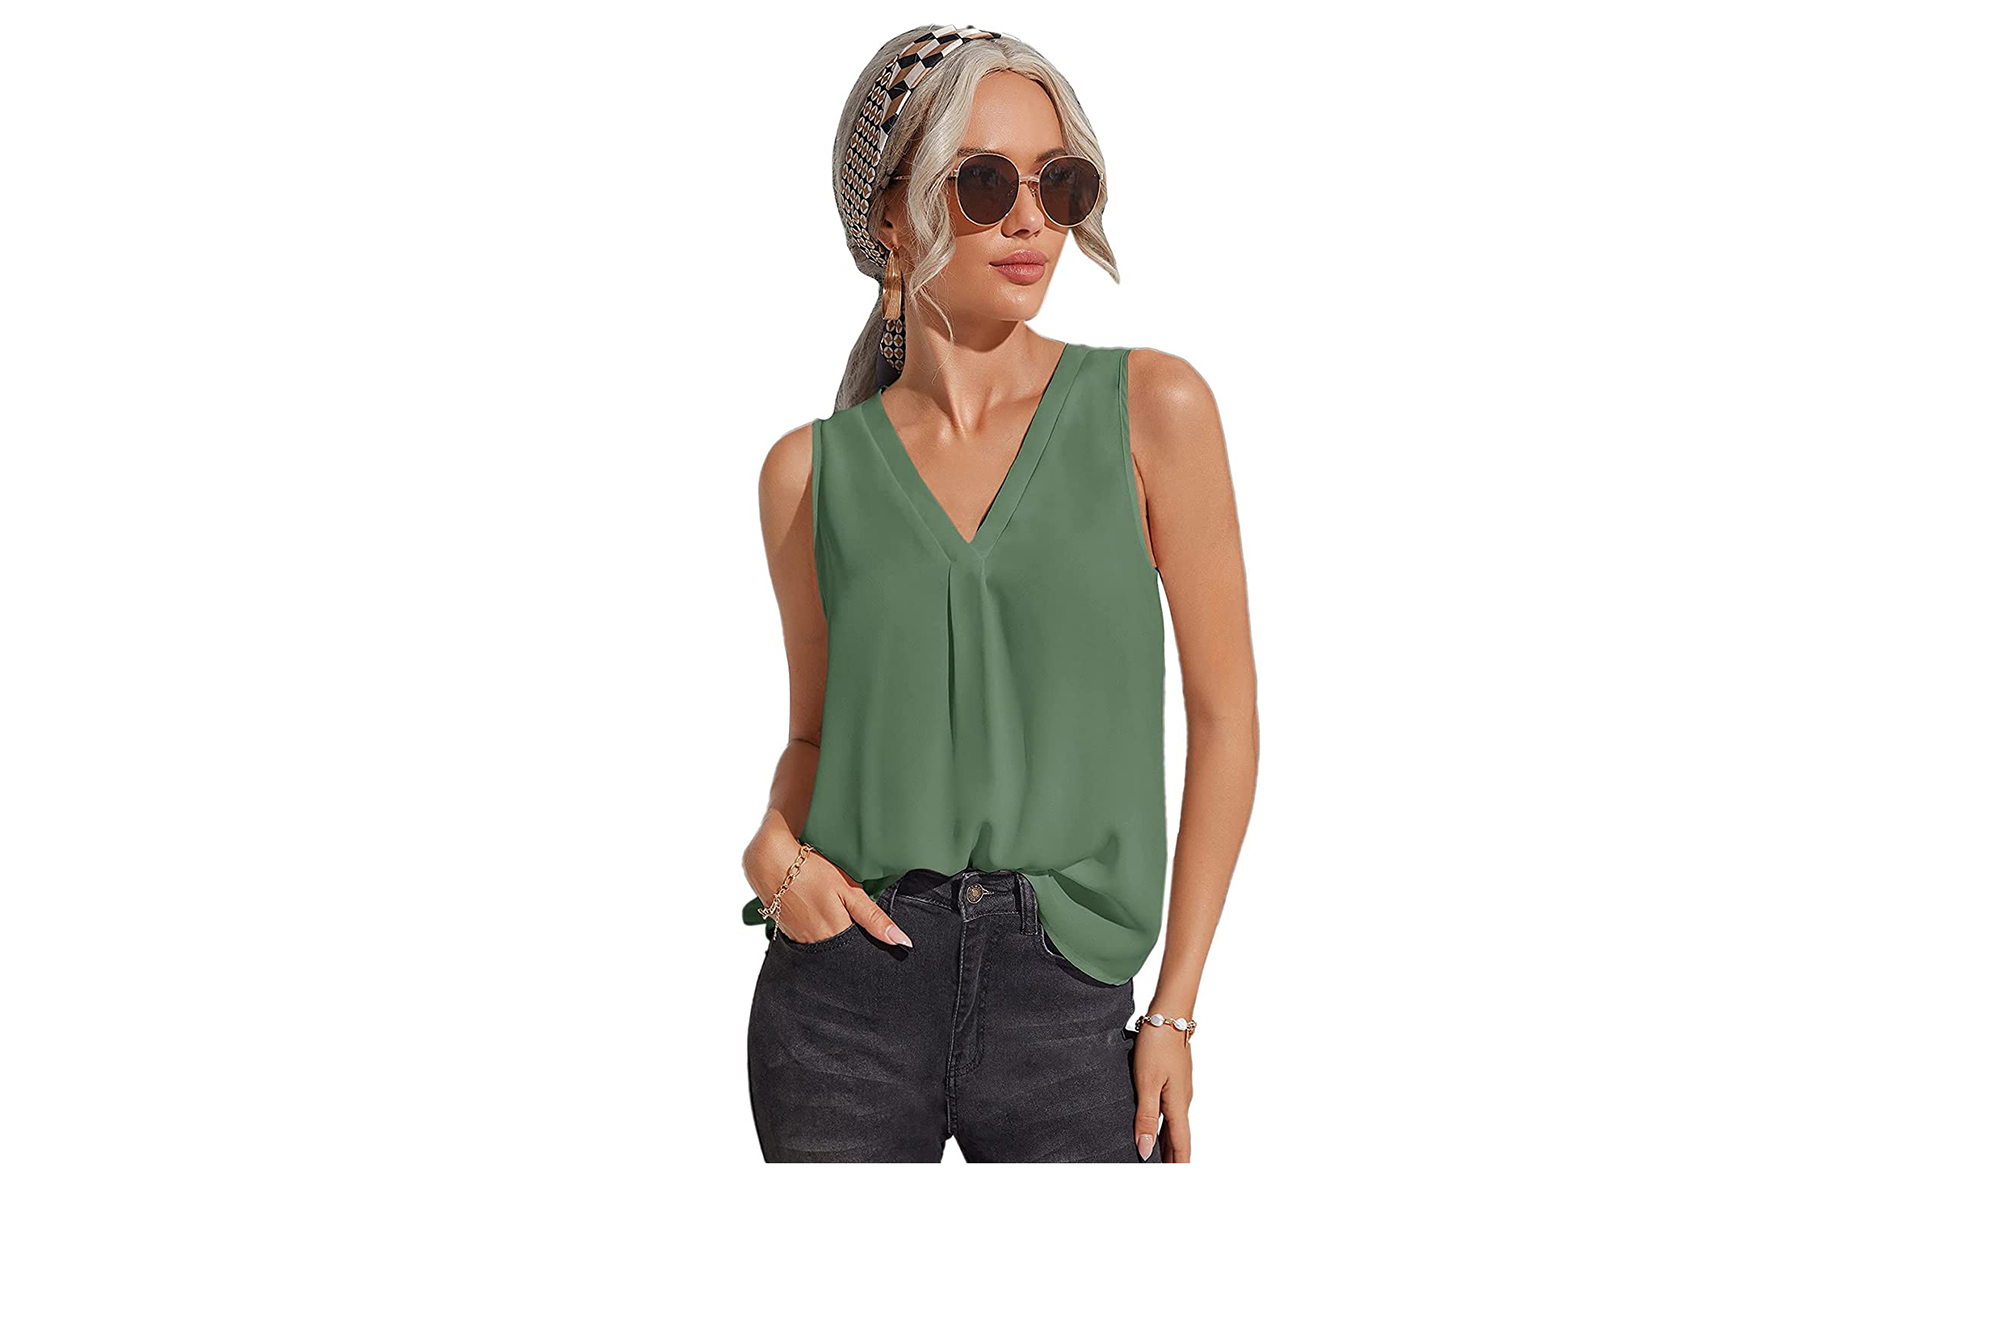 This Sleeveless Top Is Suitable for Work or Out of Office — Only $18!